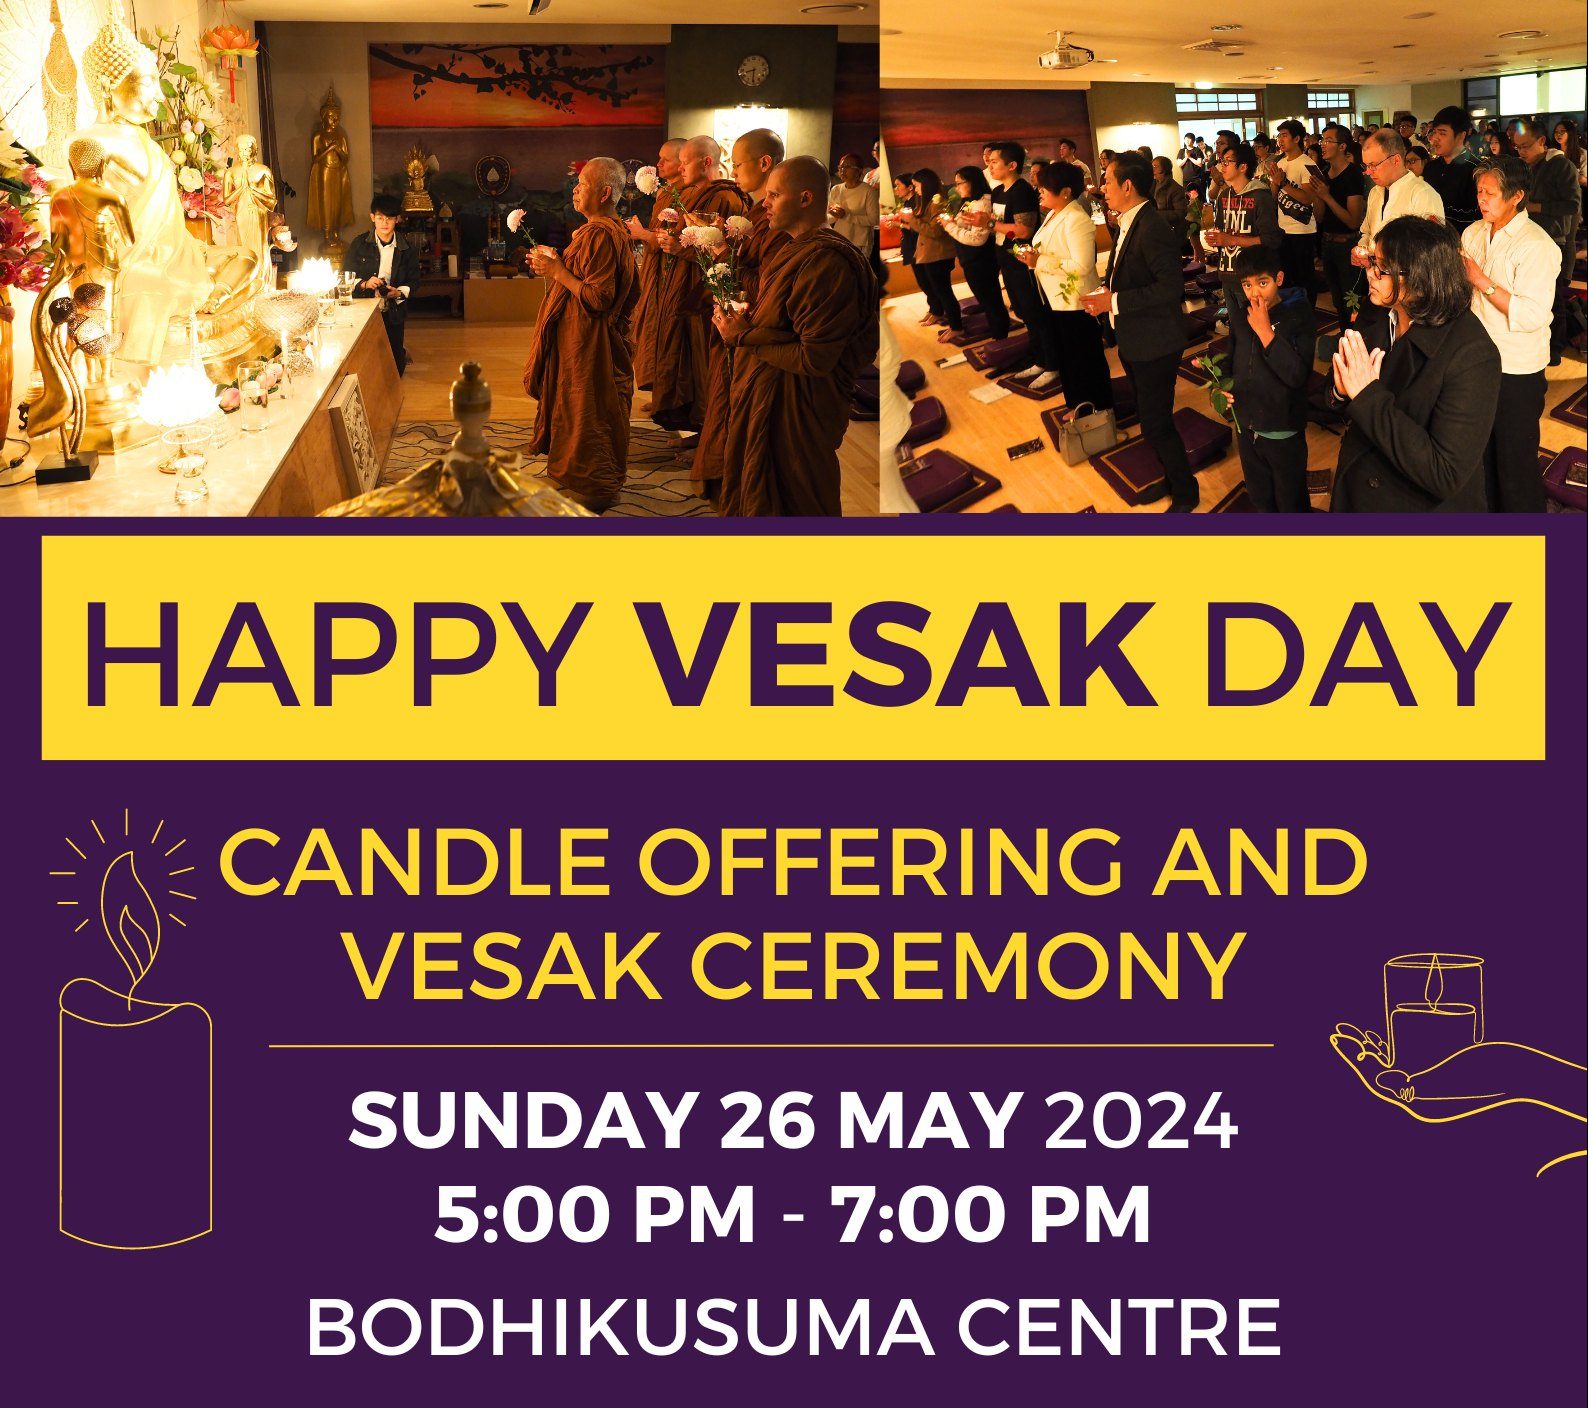 Vesak Ceremony and Candle Offering